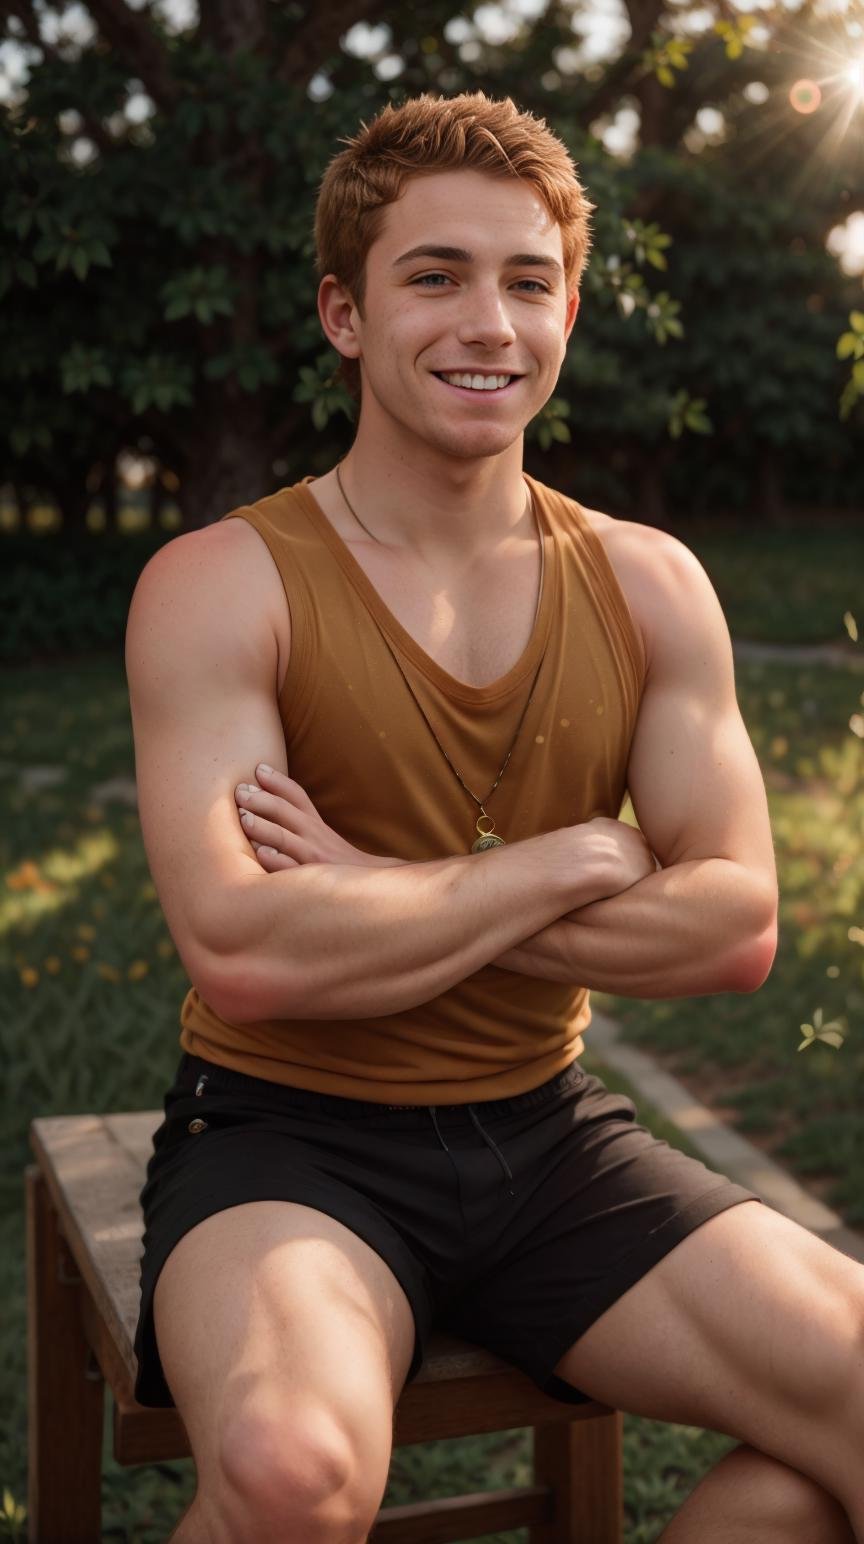 male, solo, Masterpiece, RAW photography, smiling, sitting, knees up, elbows bent, outdoors, <lora:PinkSkin:0.75>, auburn sleeveless shirt, (lens flare:1.2), golden hour, DOF, blurry background, (freckled skin:0.6),( detailed skin:0.8), detailed face, freckled face, glossy skin, ring, (red colored hair:1.1 with Brown streaks)